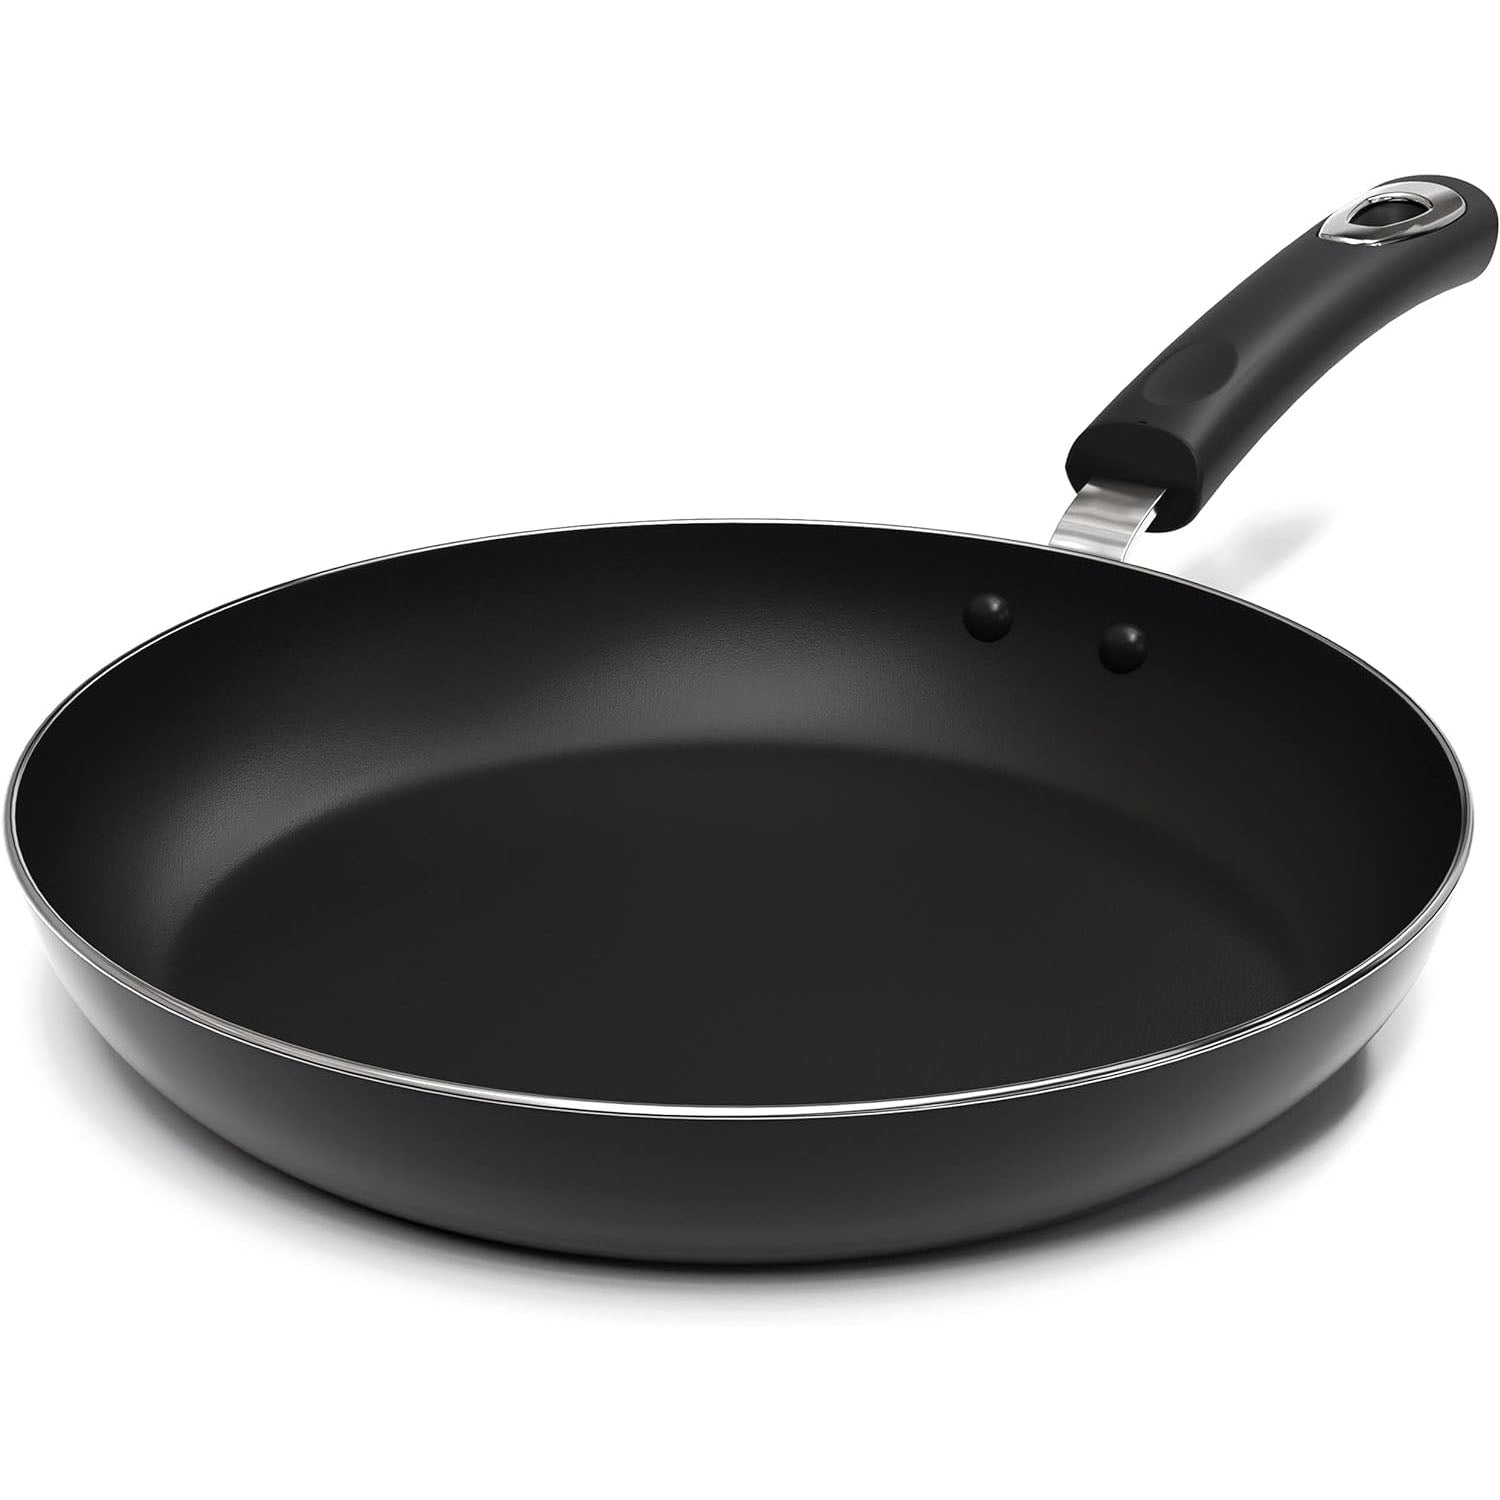 Utopia Kitchen Saute Fry Pan - Nonstick Frying Pan - 11 Inch Induction  Bottom - Aluminum Alloy and Scratch Resistant Body - Riveted Handle  (Red-Black)